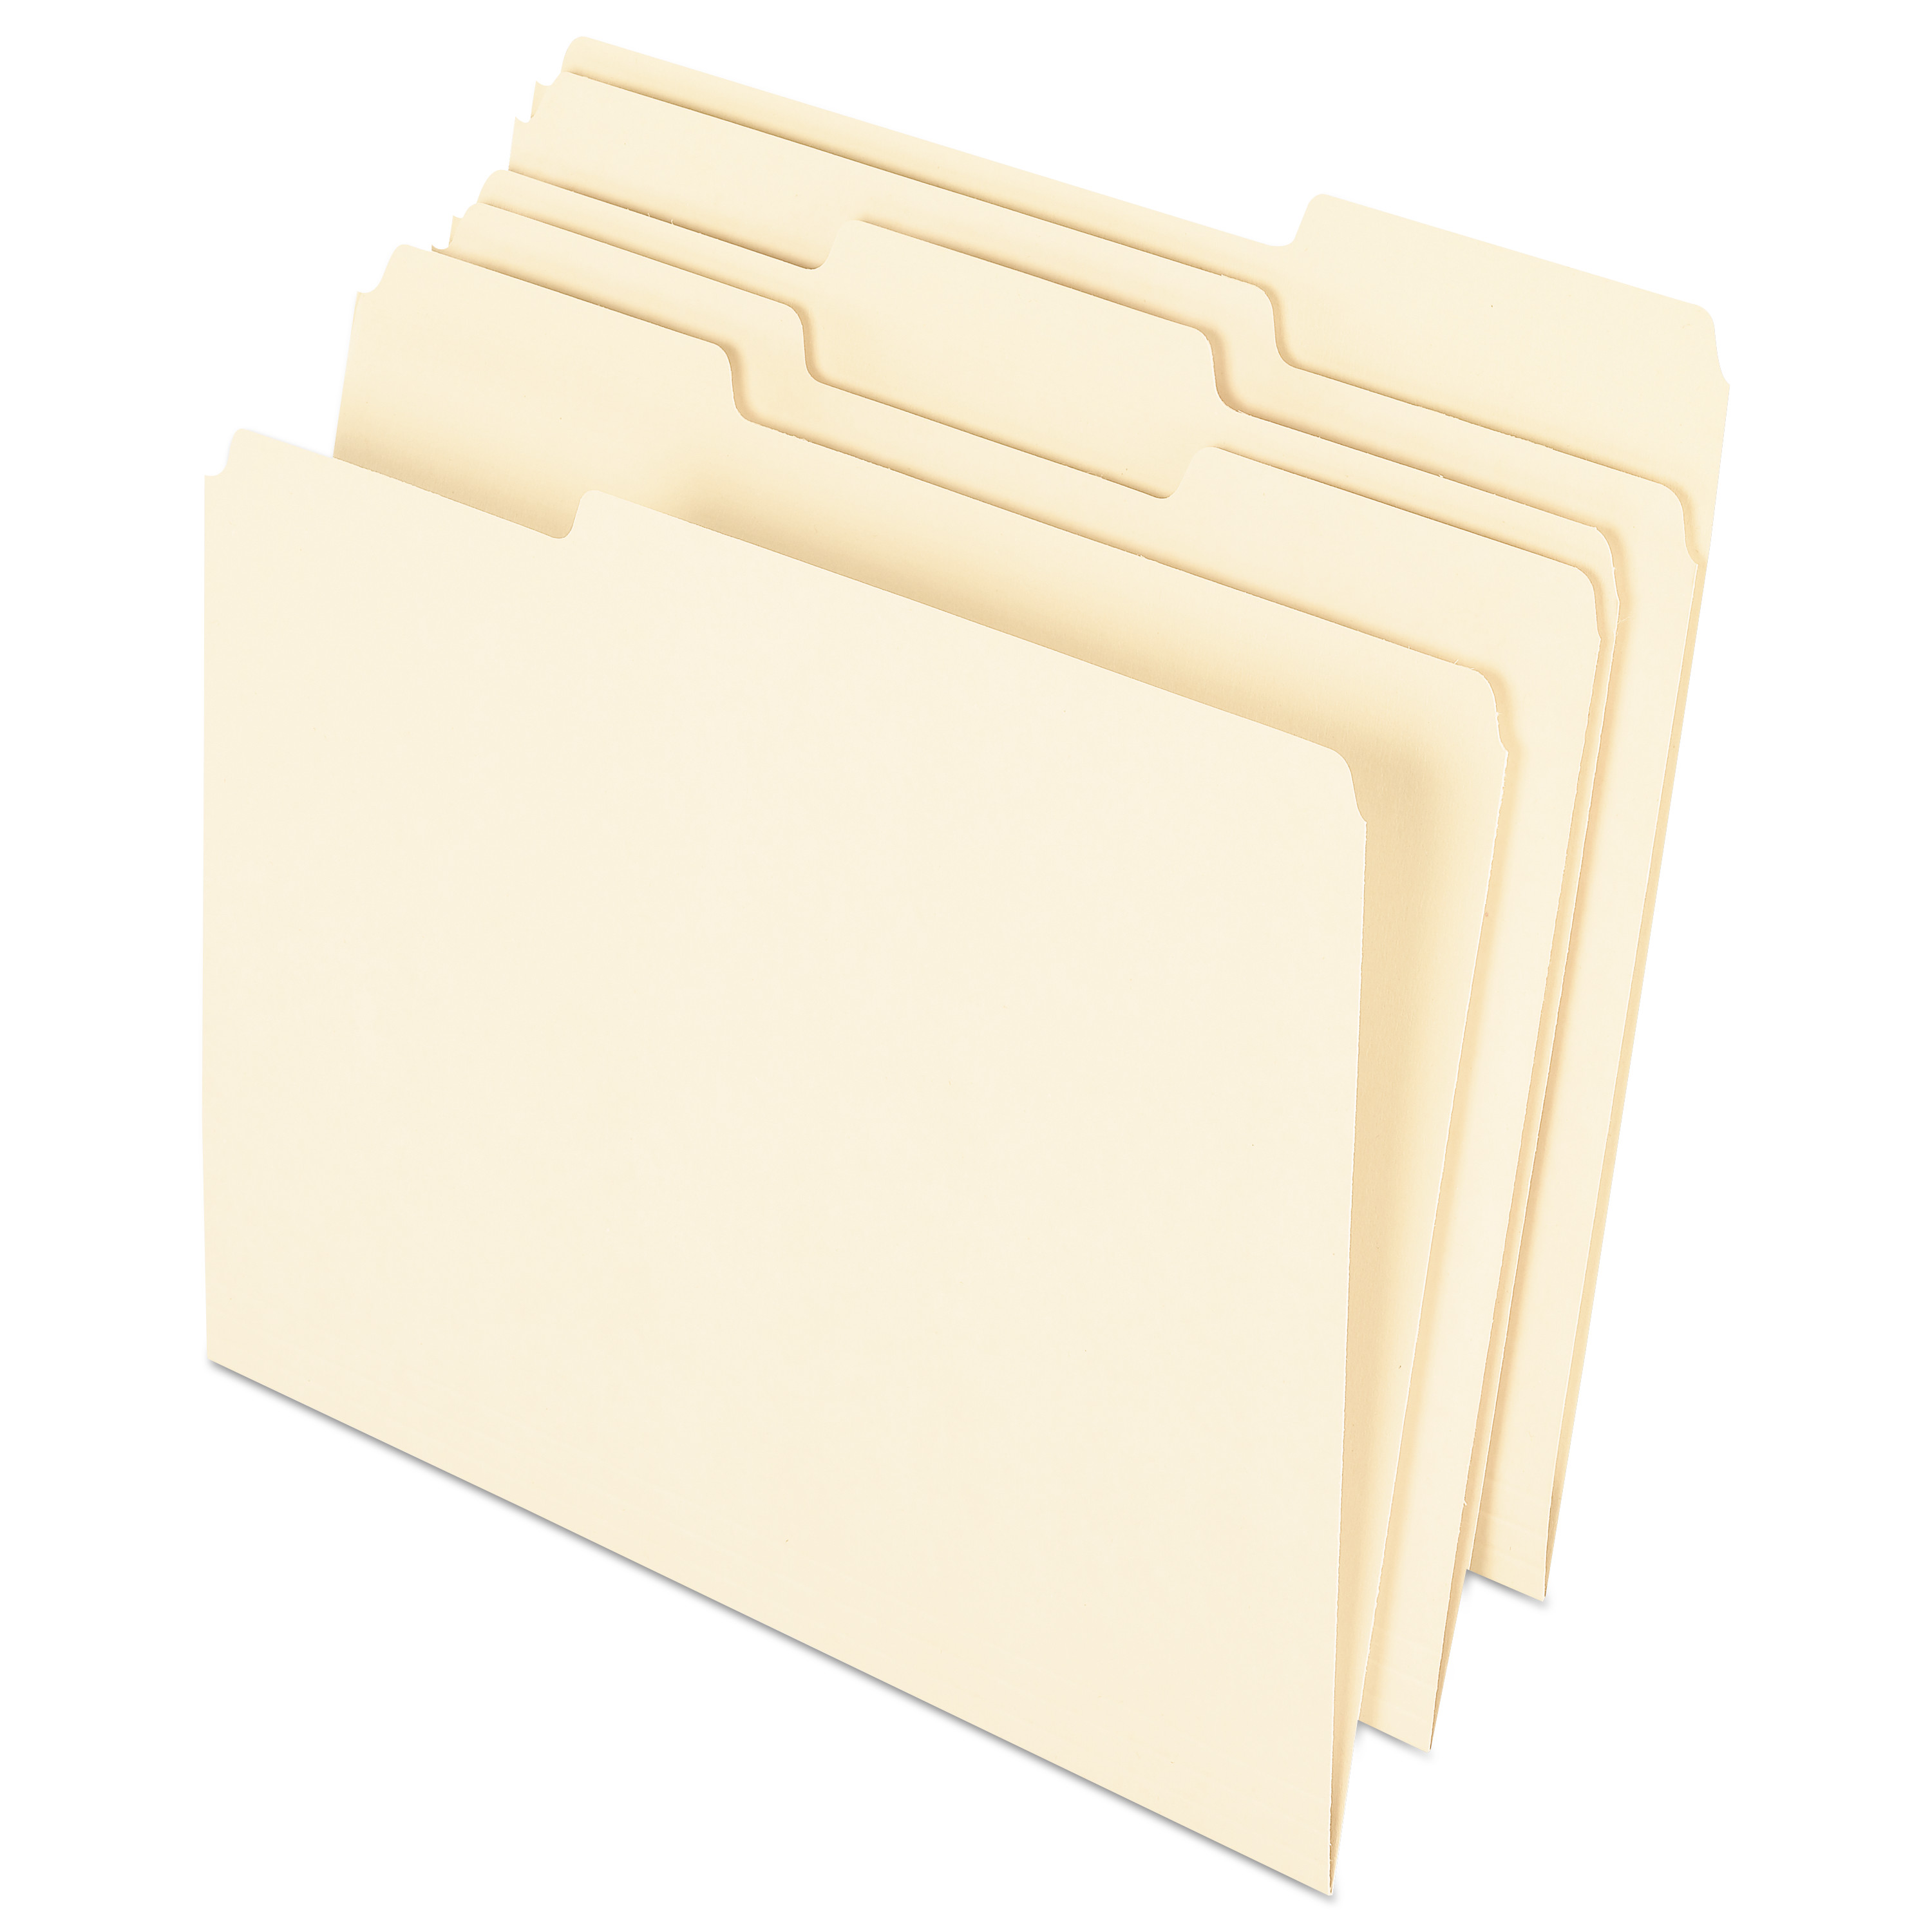  Pendaflex 74520 Earthwise by 100% Recycled Manila File Folders, 1/3-Cut Tabs, Letter Size, 100/Box (PFX74520) 